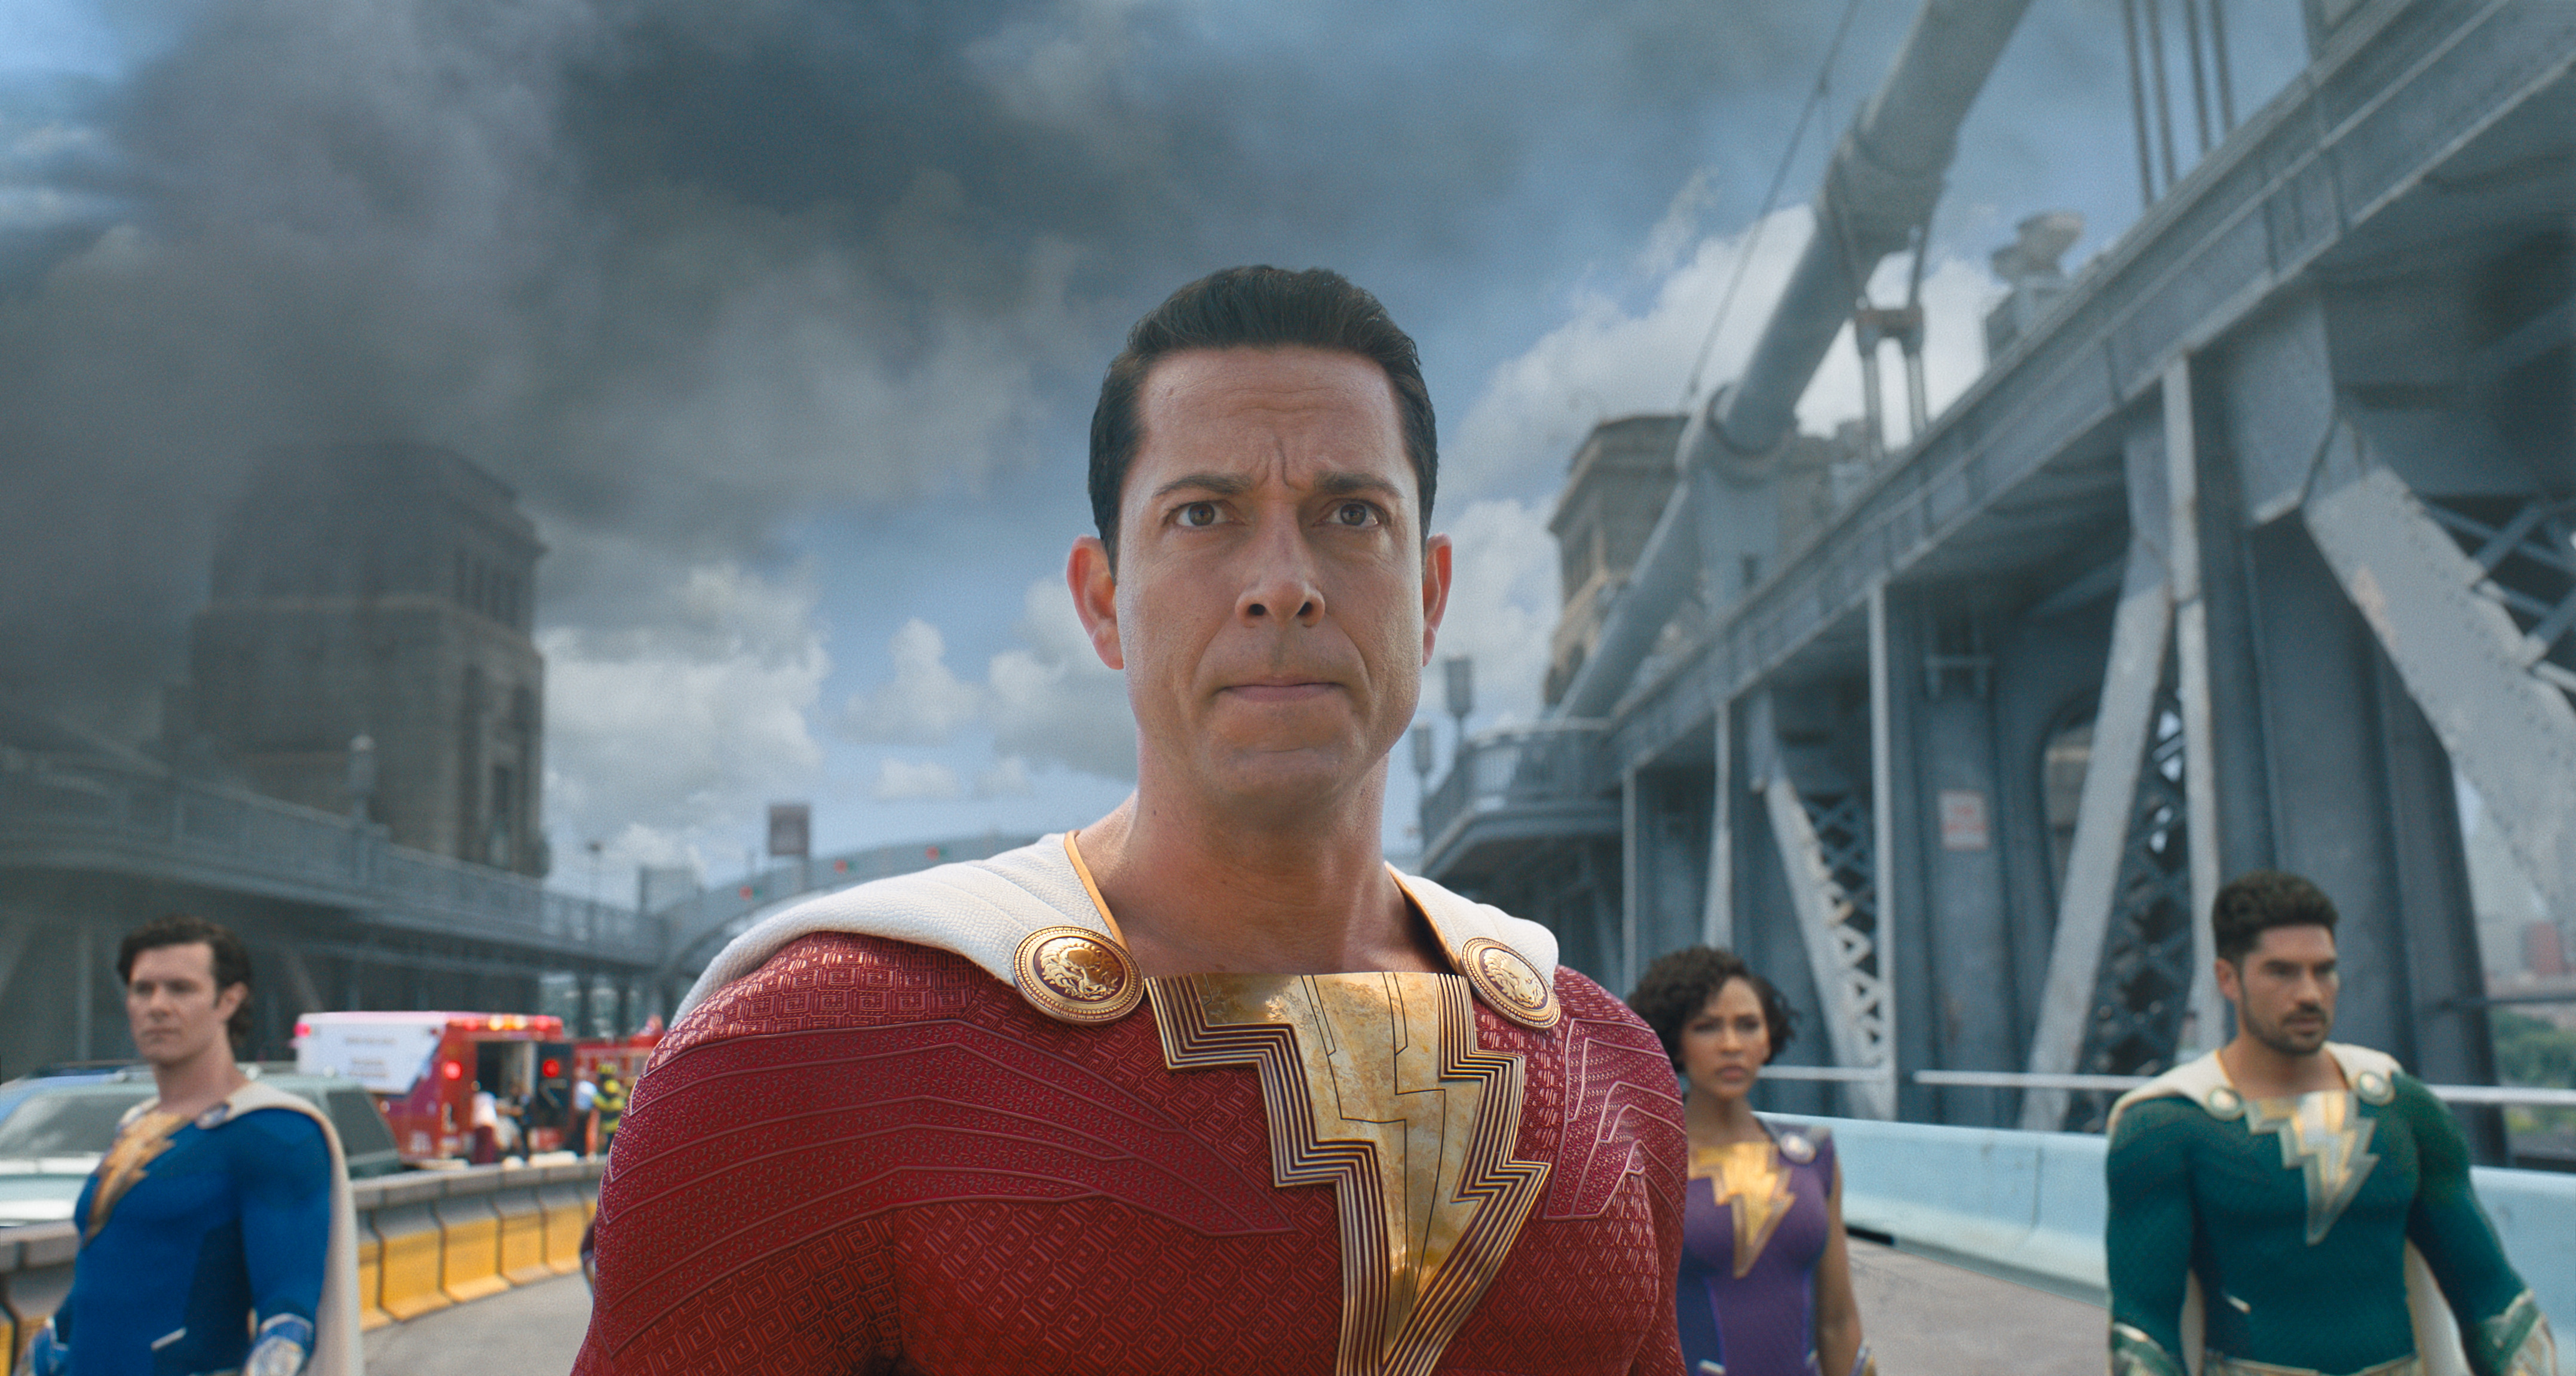 A new trailer for 'Shazam! Fury of the Gods' is coming tomorrow